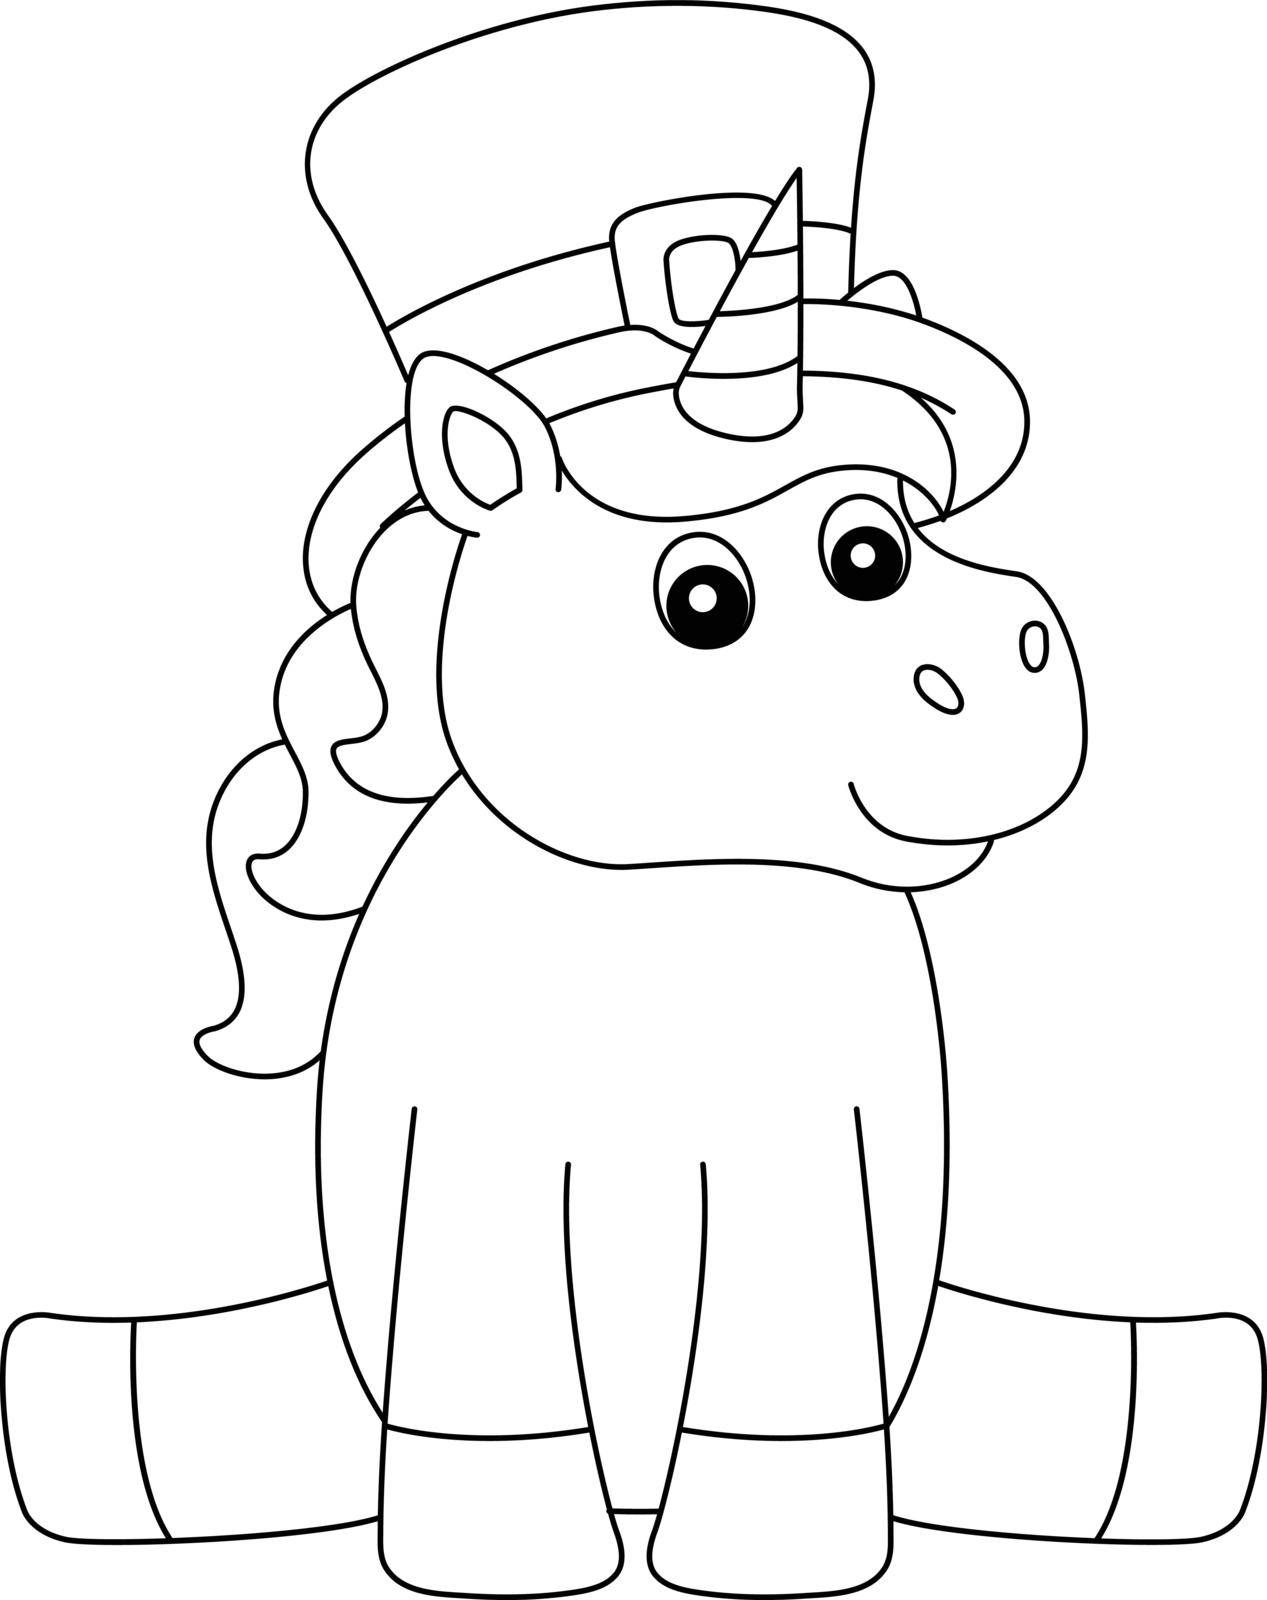 St. Patrick Day Unicorn Coloring Page for Kids by abbydesign